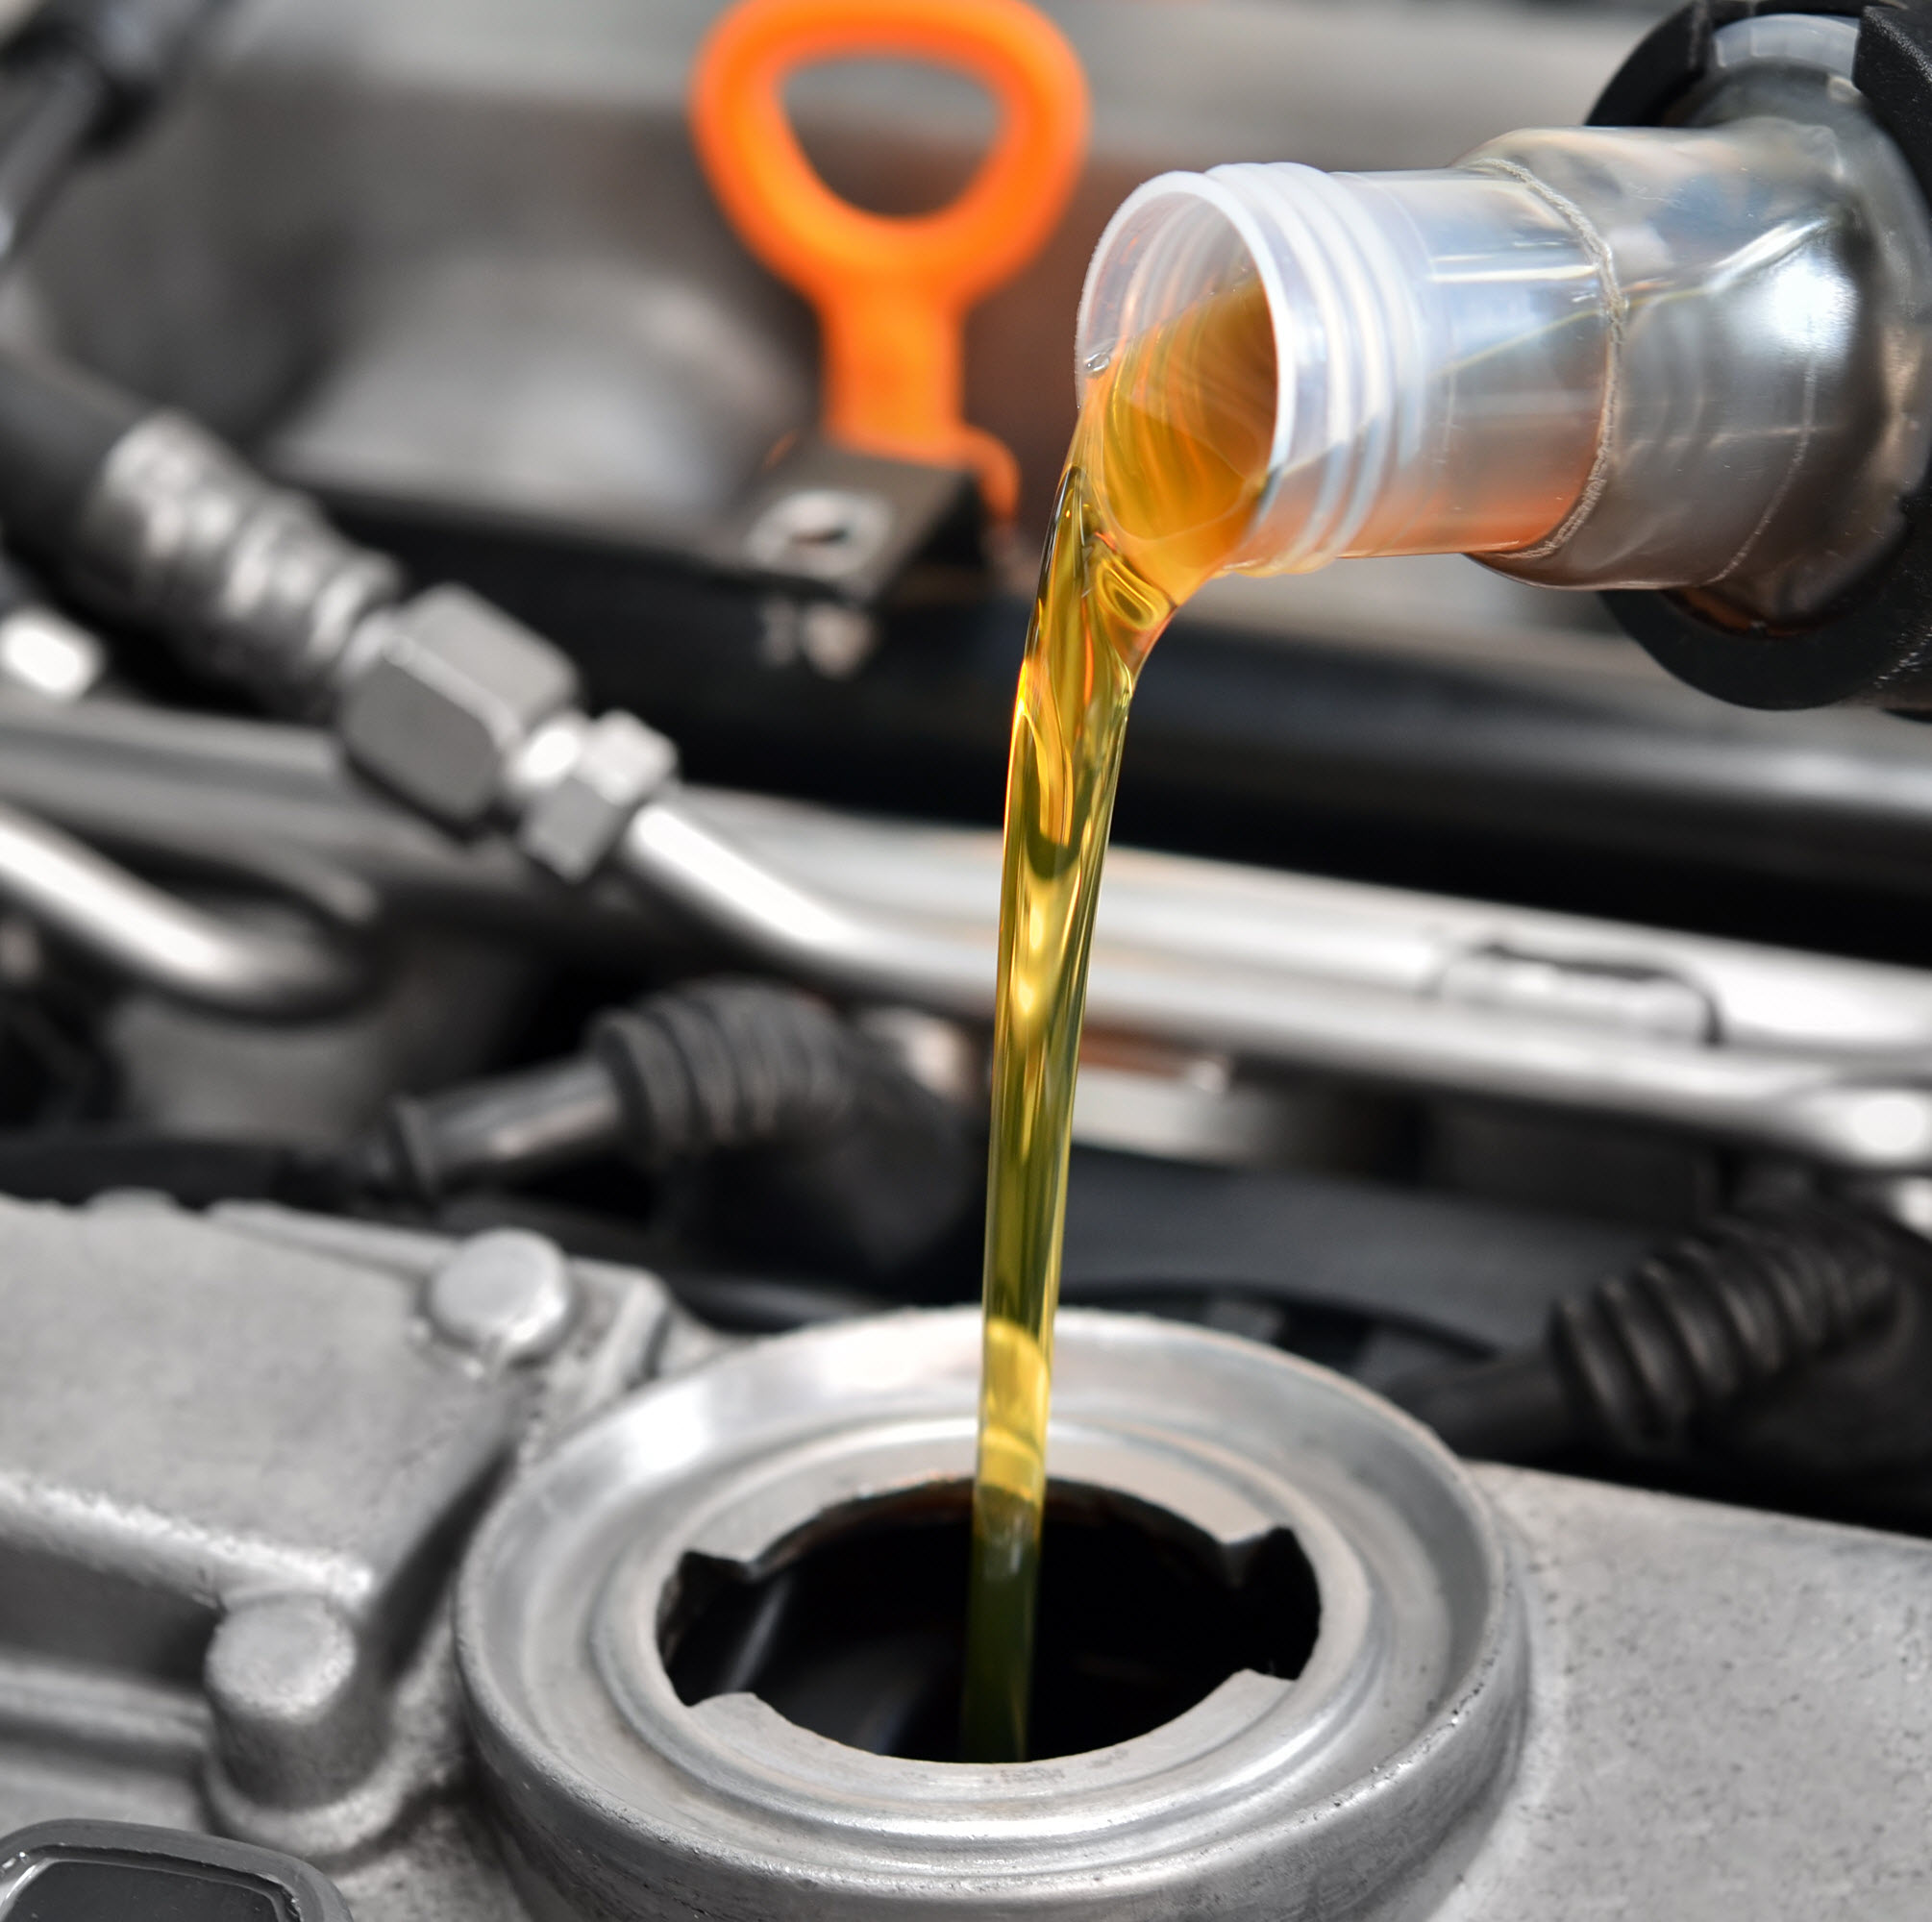 5 signs your motorcycle needs an oil change - iMotorbike News